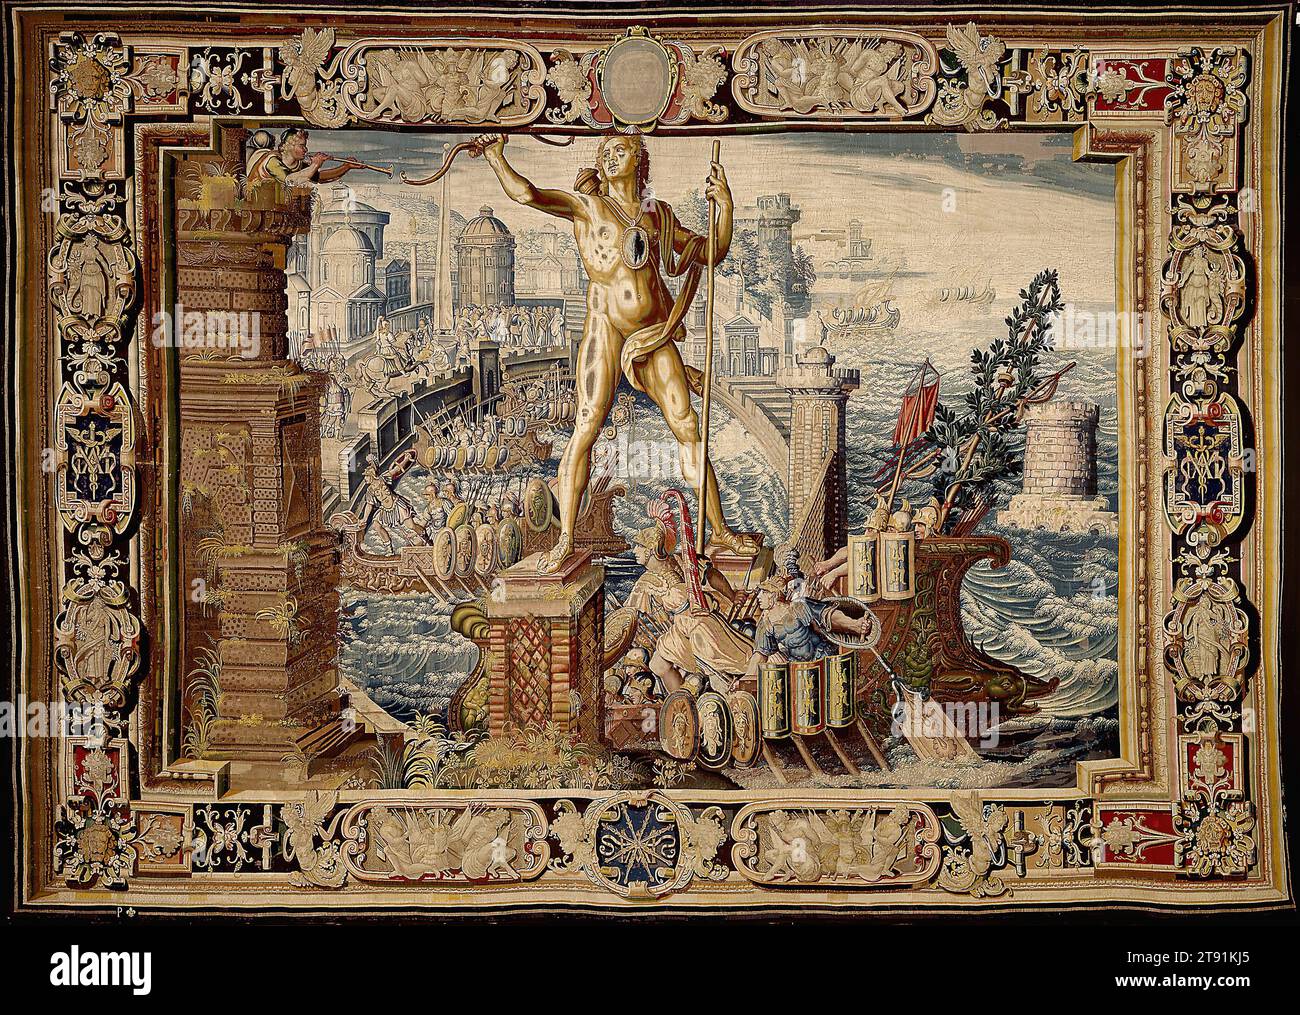 The Queen’s Entry into the Harbor of Rhodes, designed 1562–1568, Central design by Antoine Caron; Cartoonist: Cartoon attributed to Henry Lerambert; Weaver: Faubourg Saint-Marcel Manufactory of Marc de Comans and François de la Planche; Designer: Border design attributed to Henry Lerambert, French, 1521–1599, H.186-3/4 x W.264 in. (irregular), Wool, silk, silver, silver-gilt yarns; tapestry weave, France, 16th century, Dominating this scene is the Colossus of Rhodes, one of the Seven Wonders of the ancient world. He watches as the widowed Greek queen, Artemisia, in the central boat, directs Stock Photo